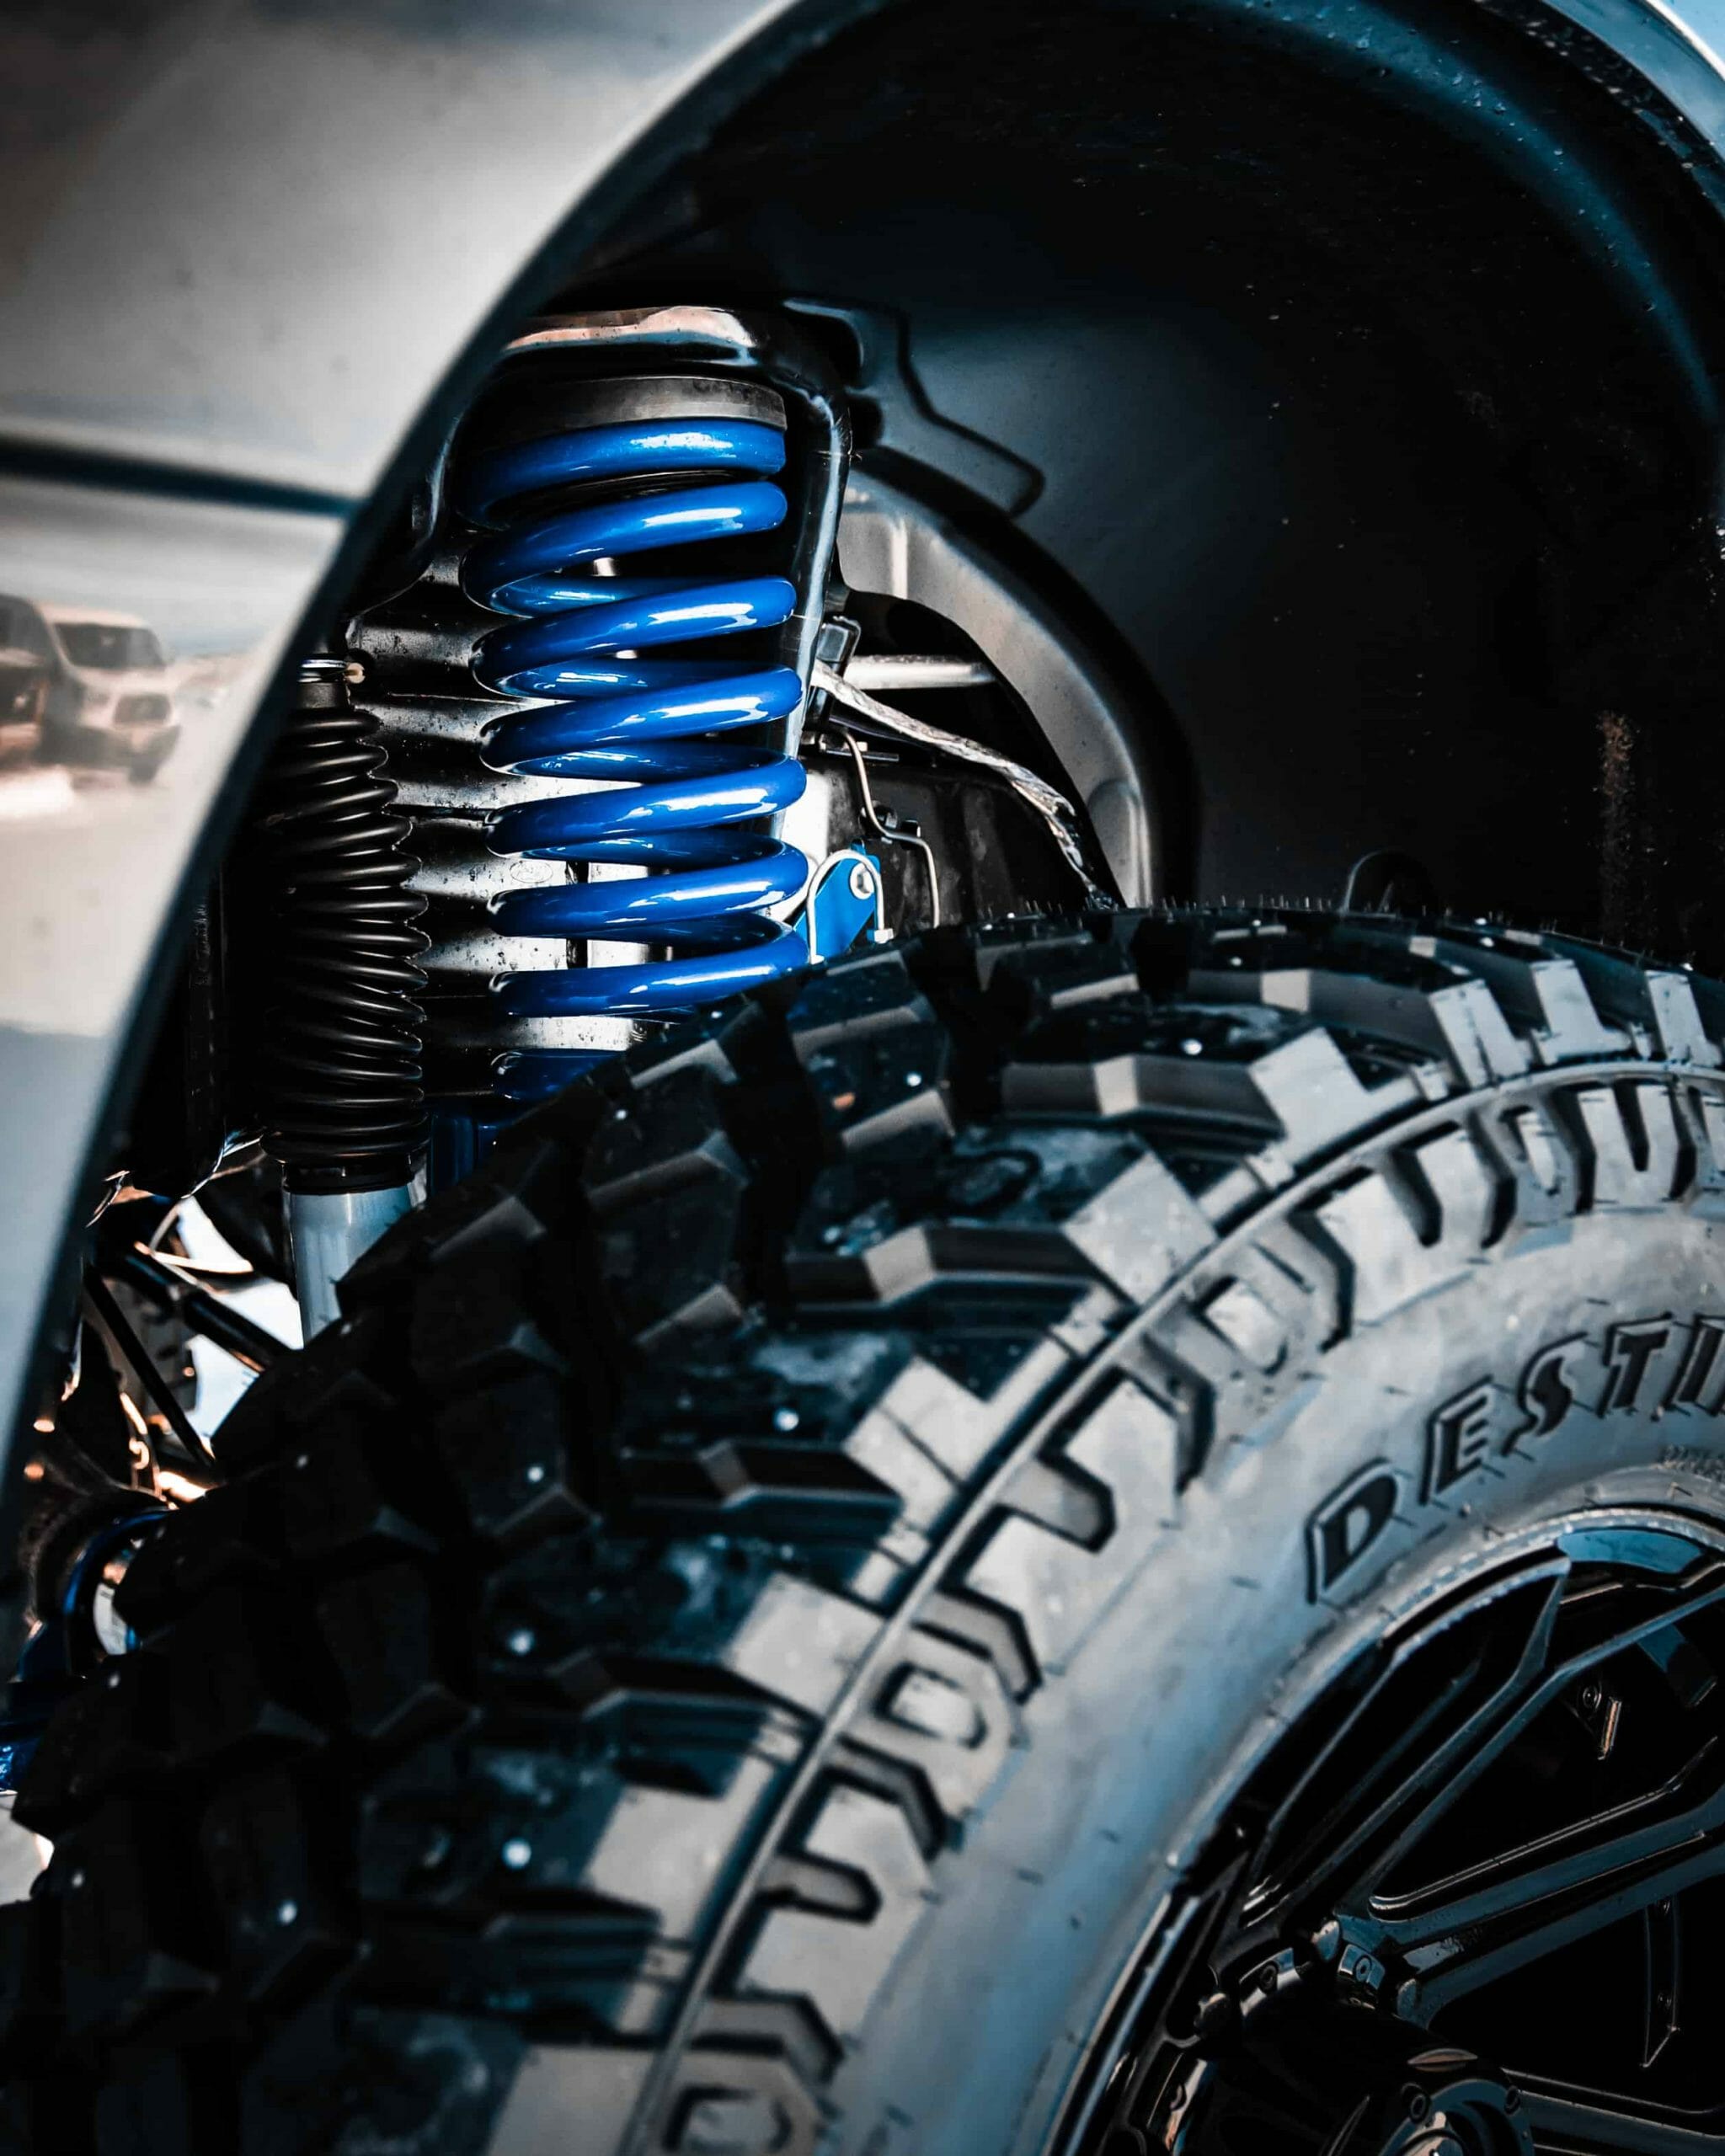 Shocks and Struts in blue